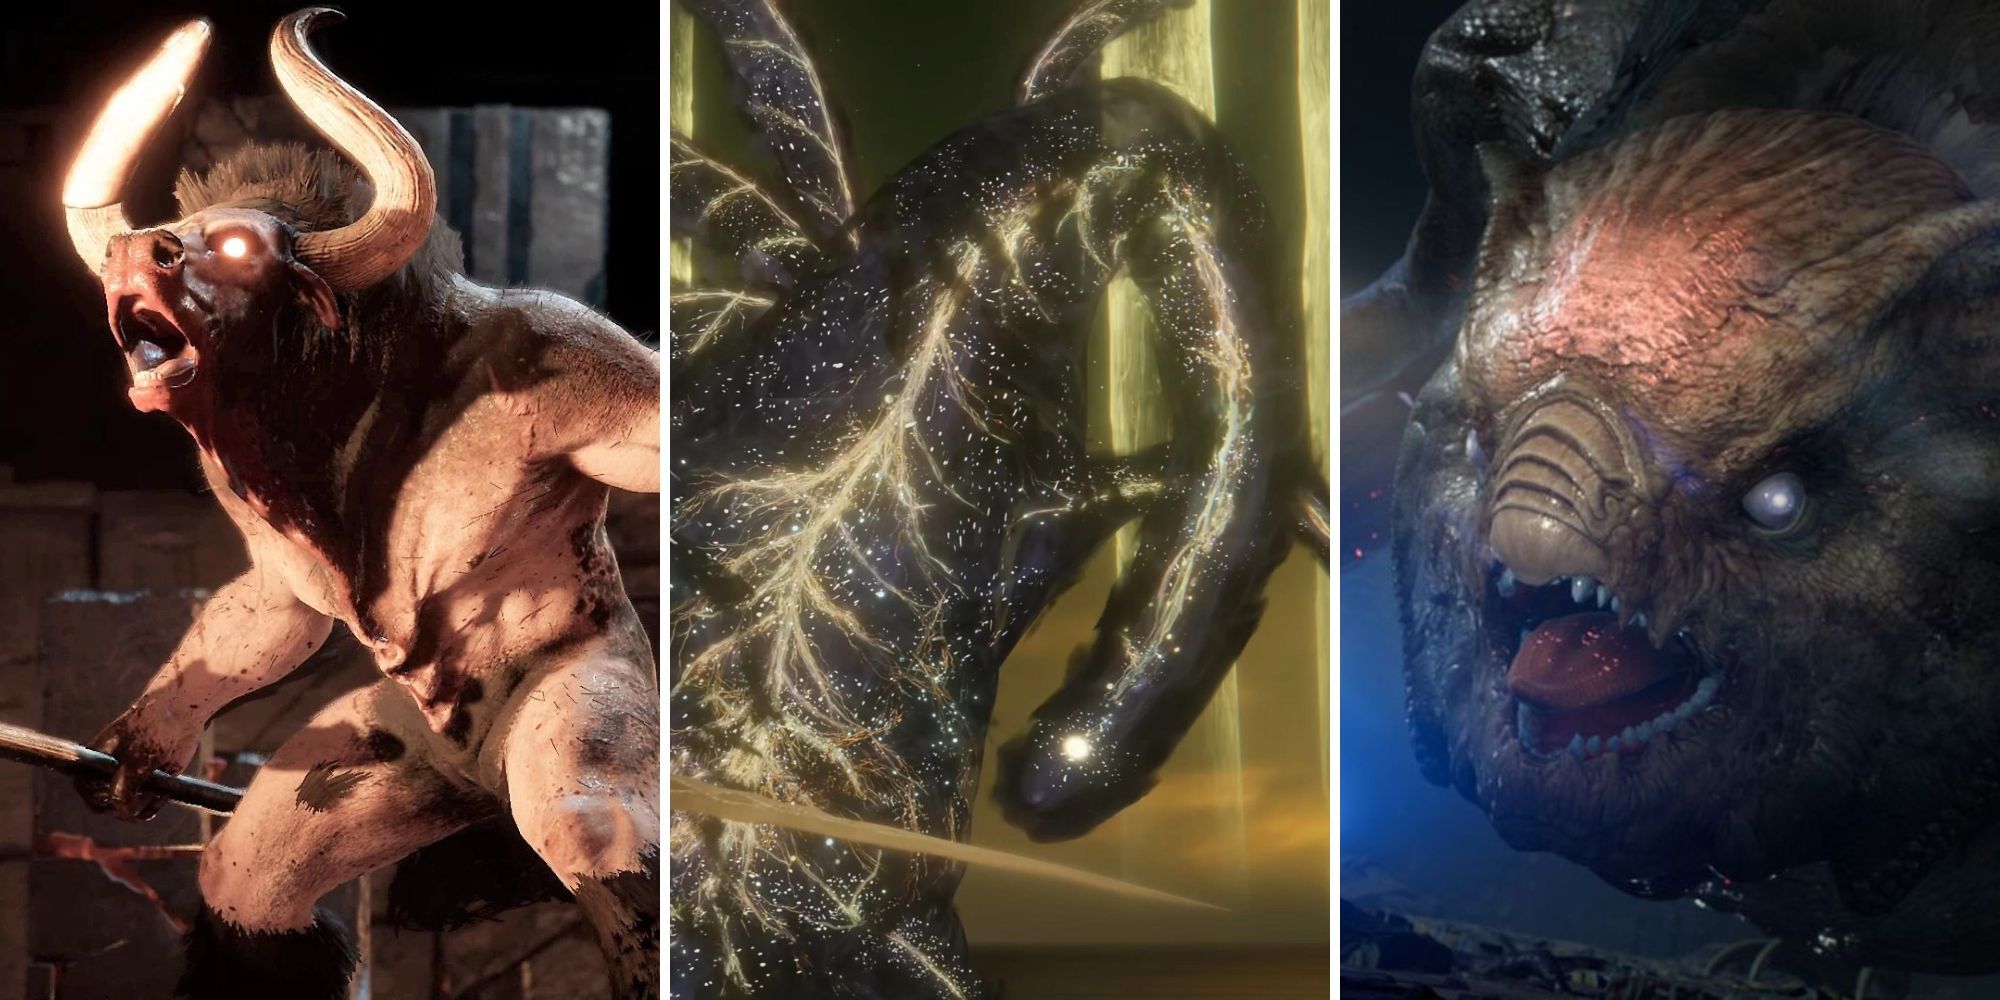 A grid of three mythical beasts from Assassin's Creed Odyssey, Elden Ring, and Star Wars Jedi: Fallen Order